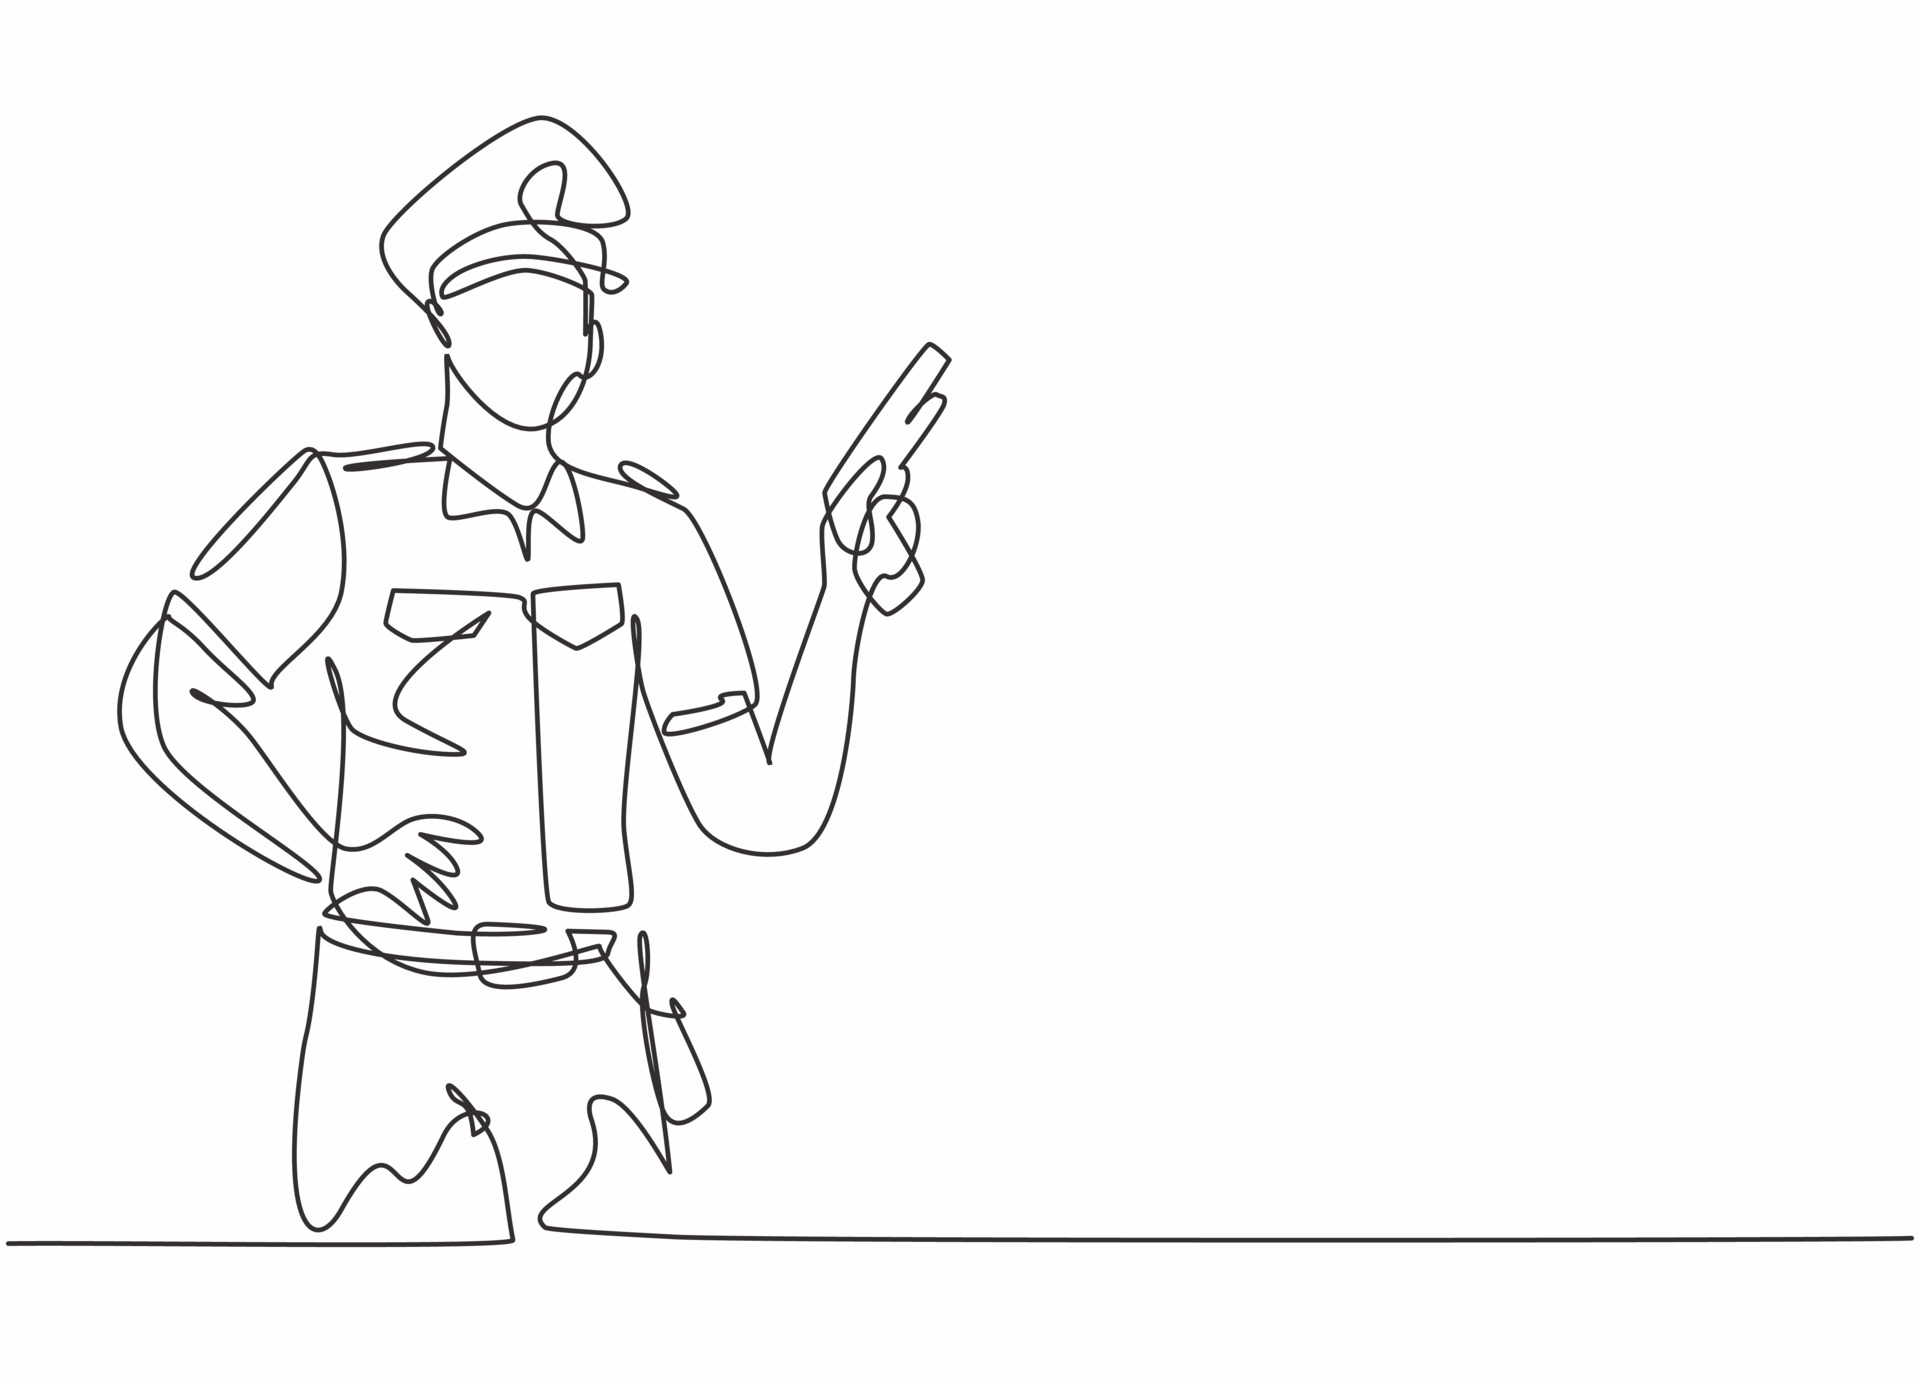 Police Officer Drawing  How To Draw A Police Officer Step By Step